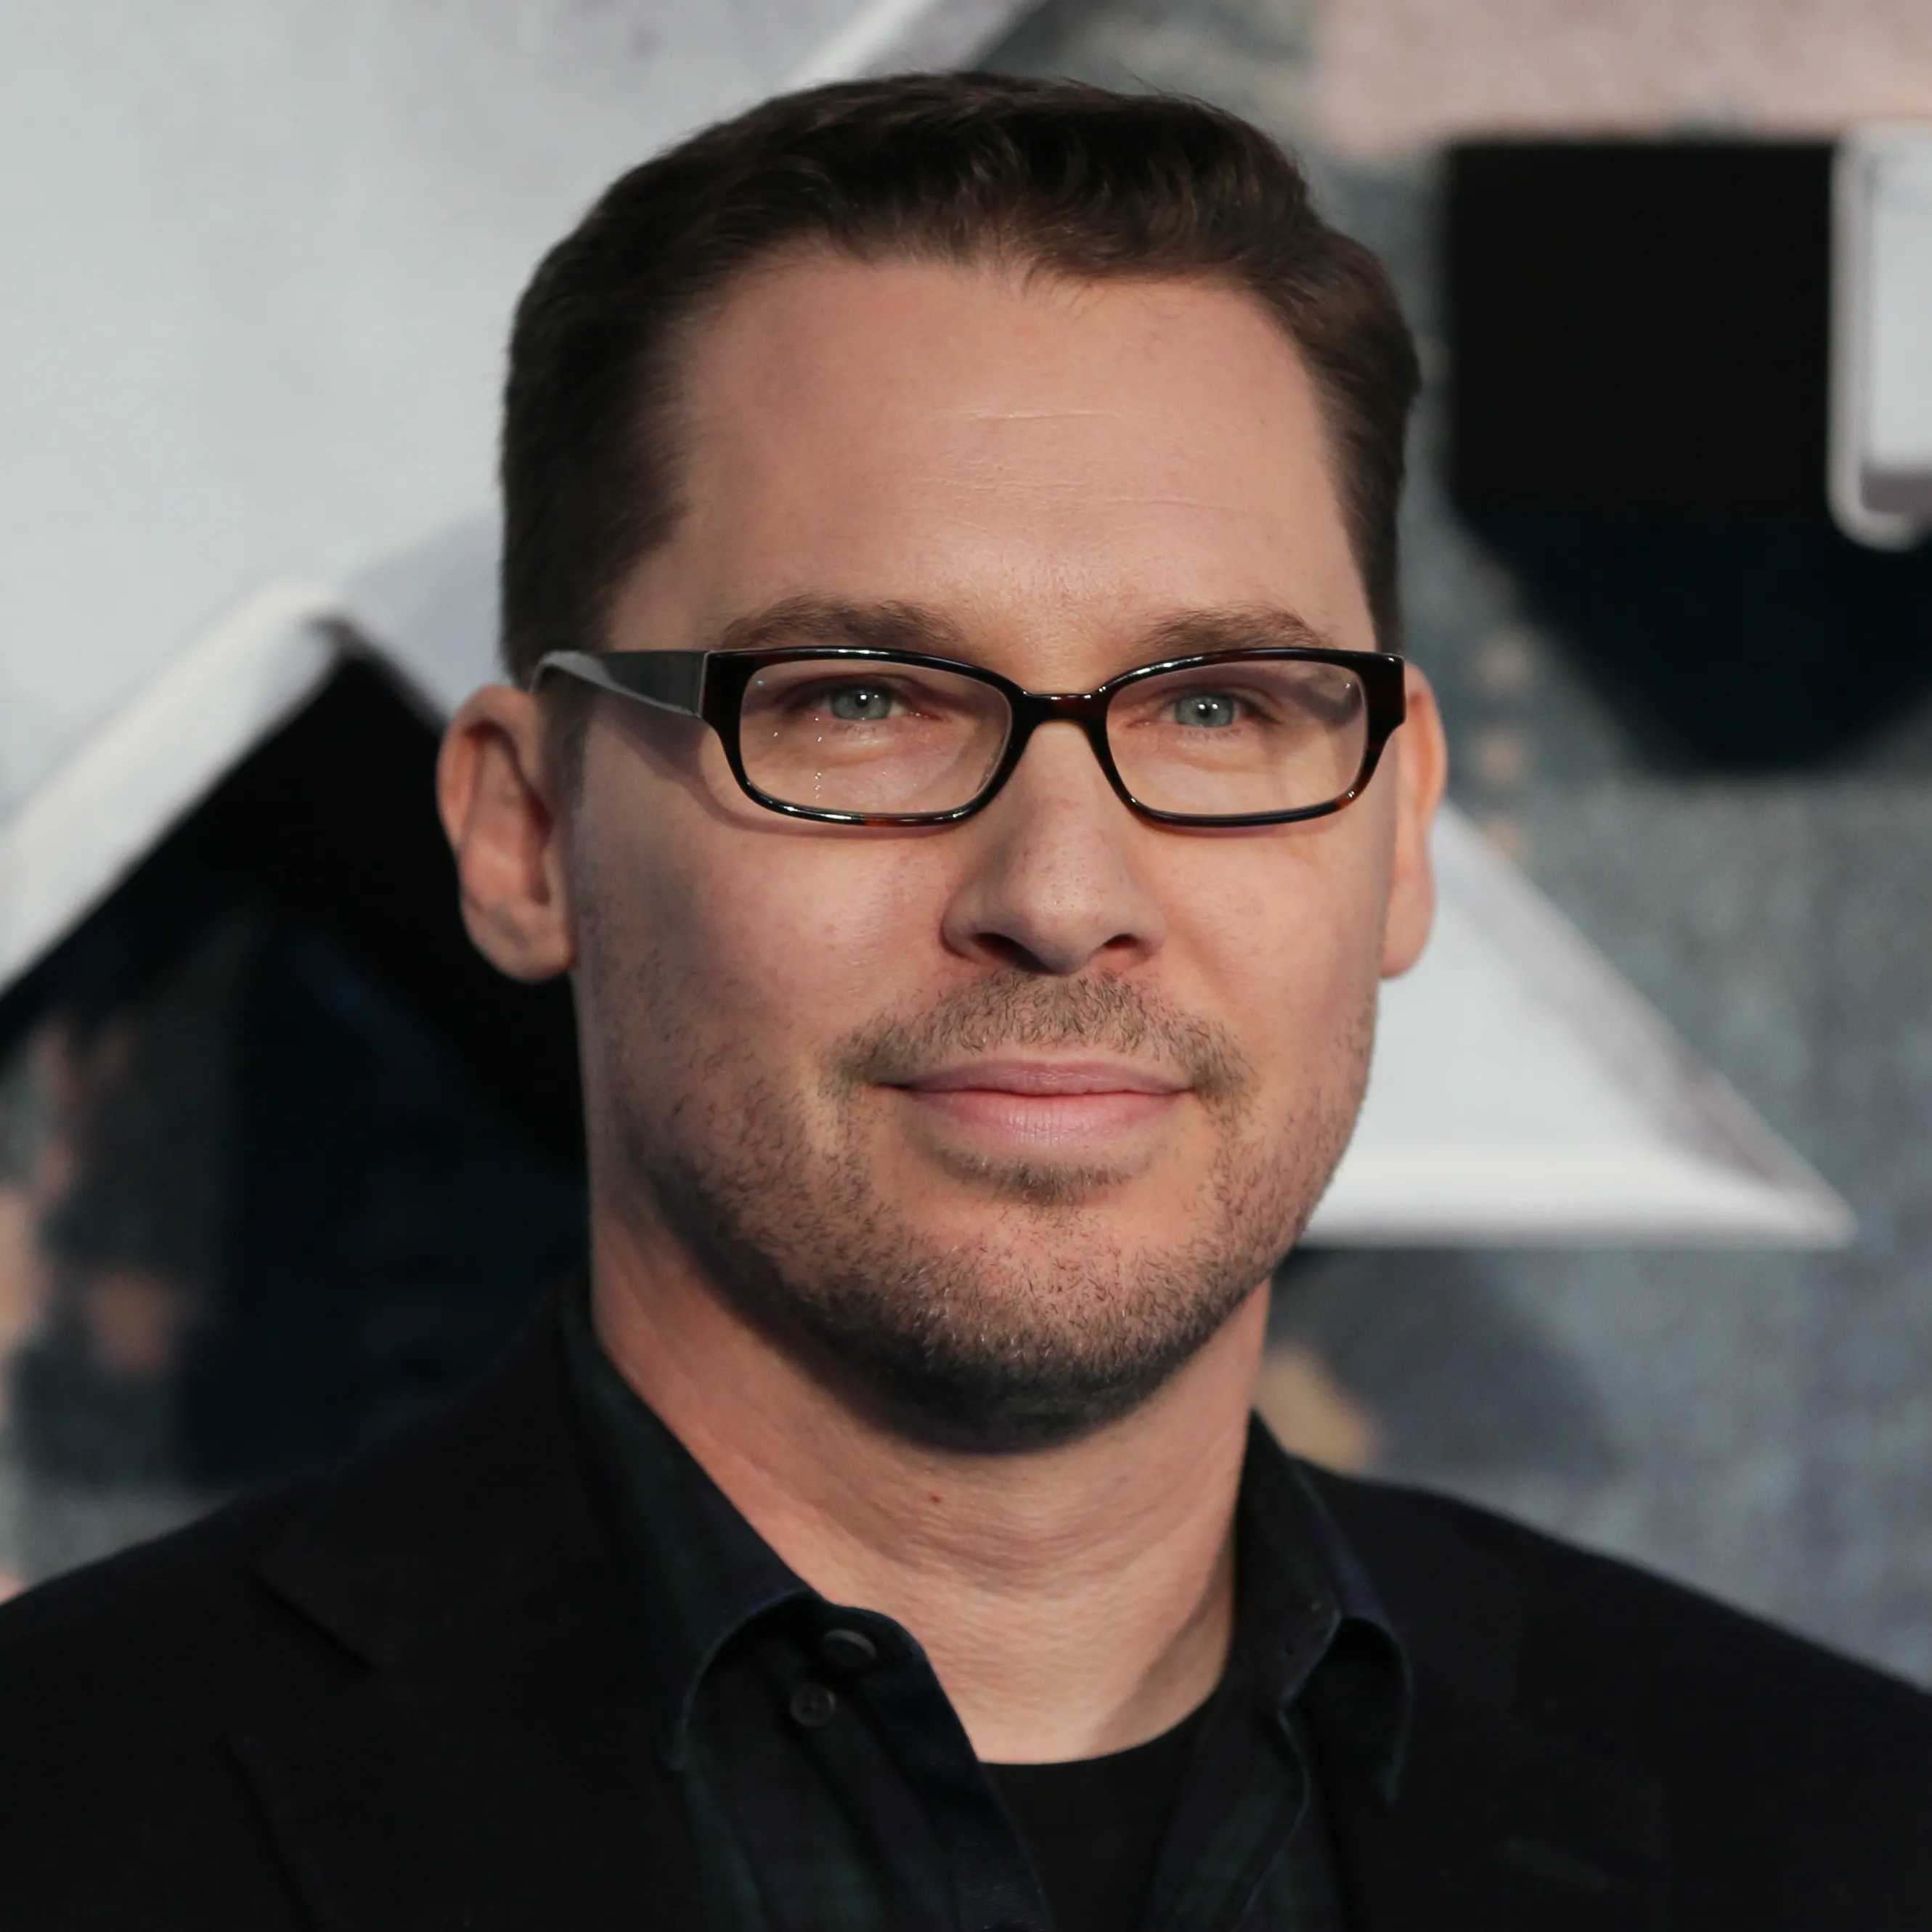 48 Facts About Bryan Singer - Facts.net